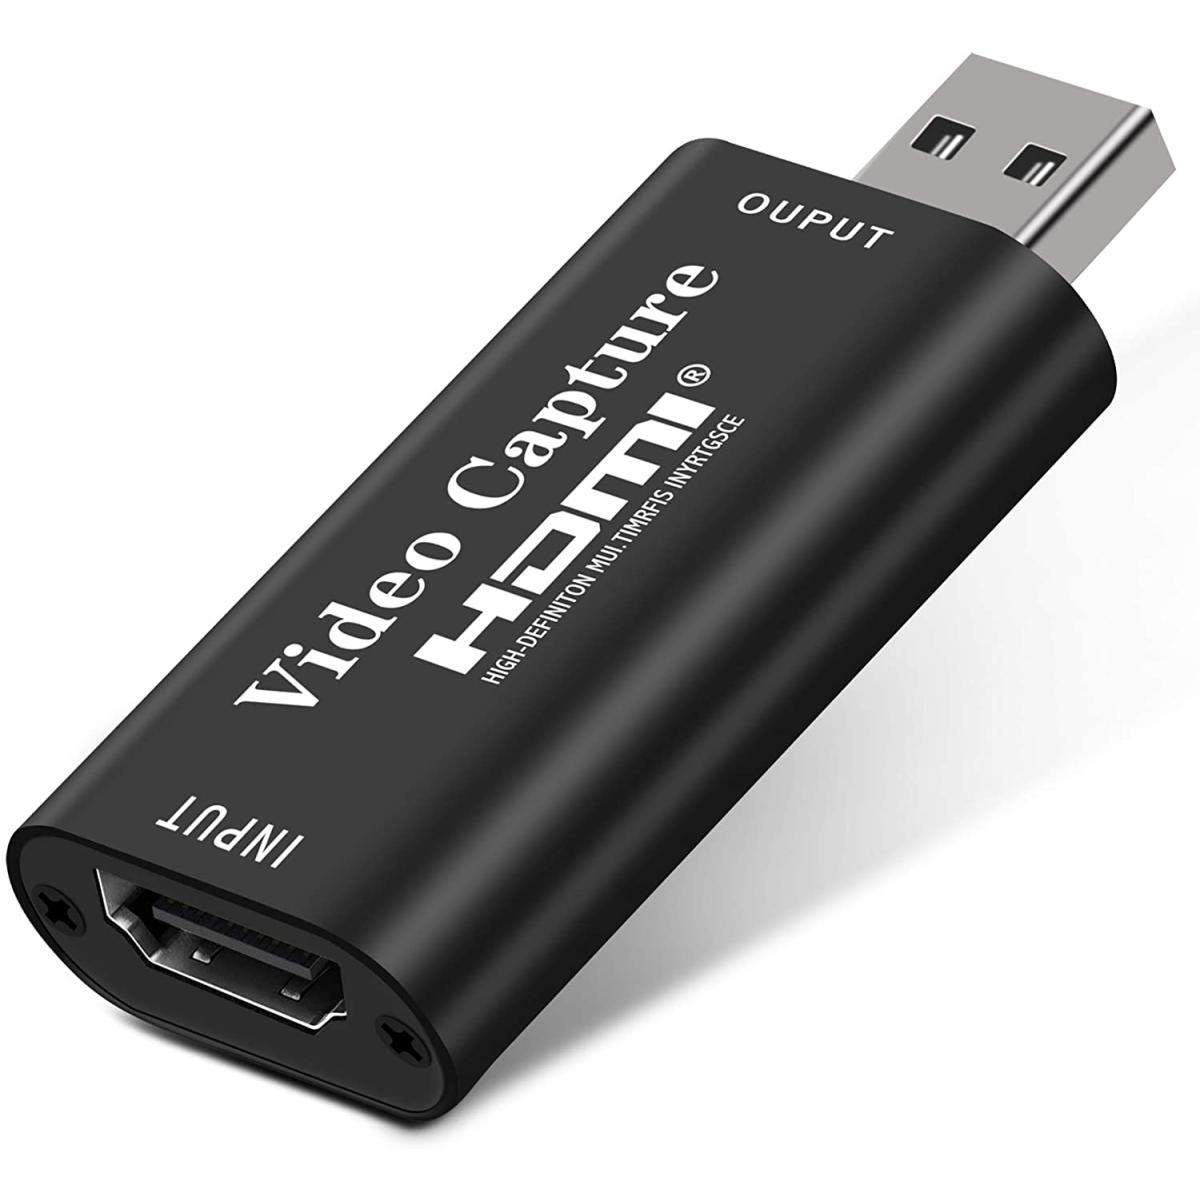 HDMI to USB 2.0 Video Capture adapter